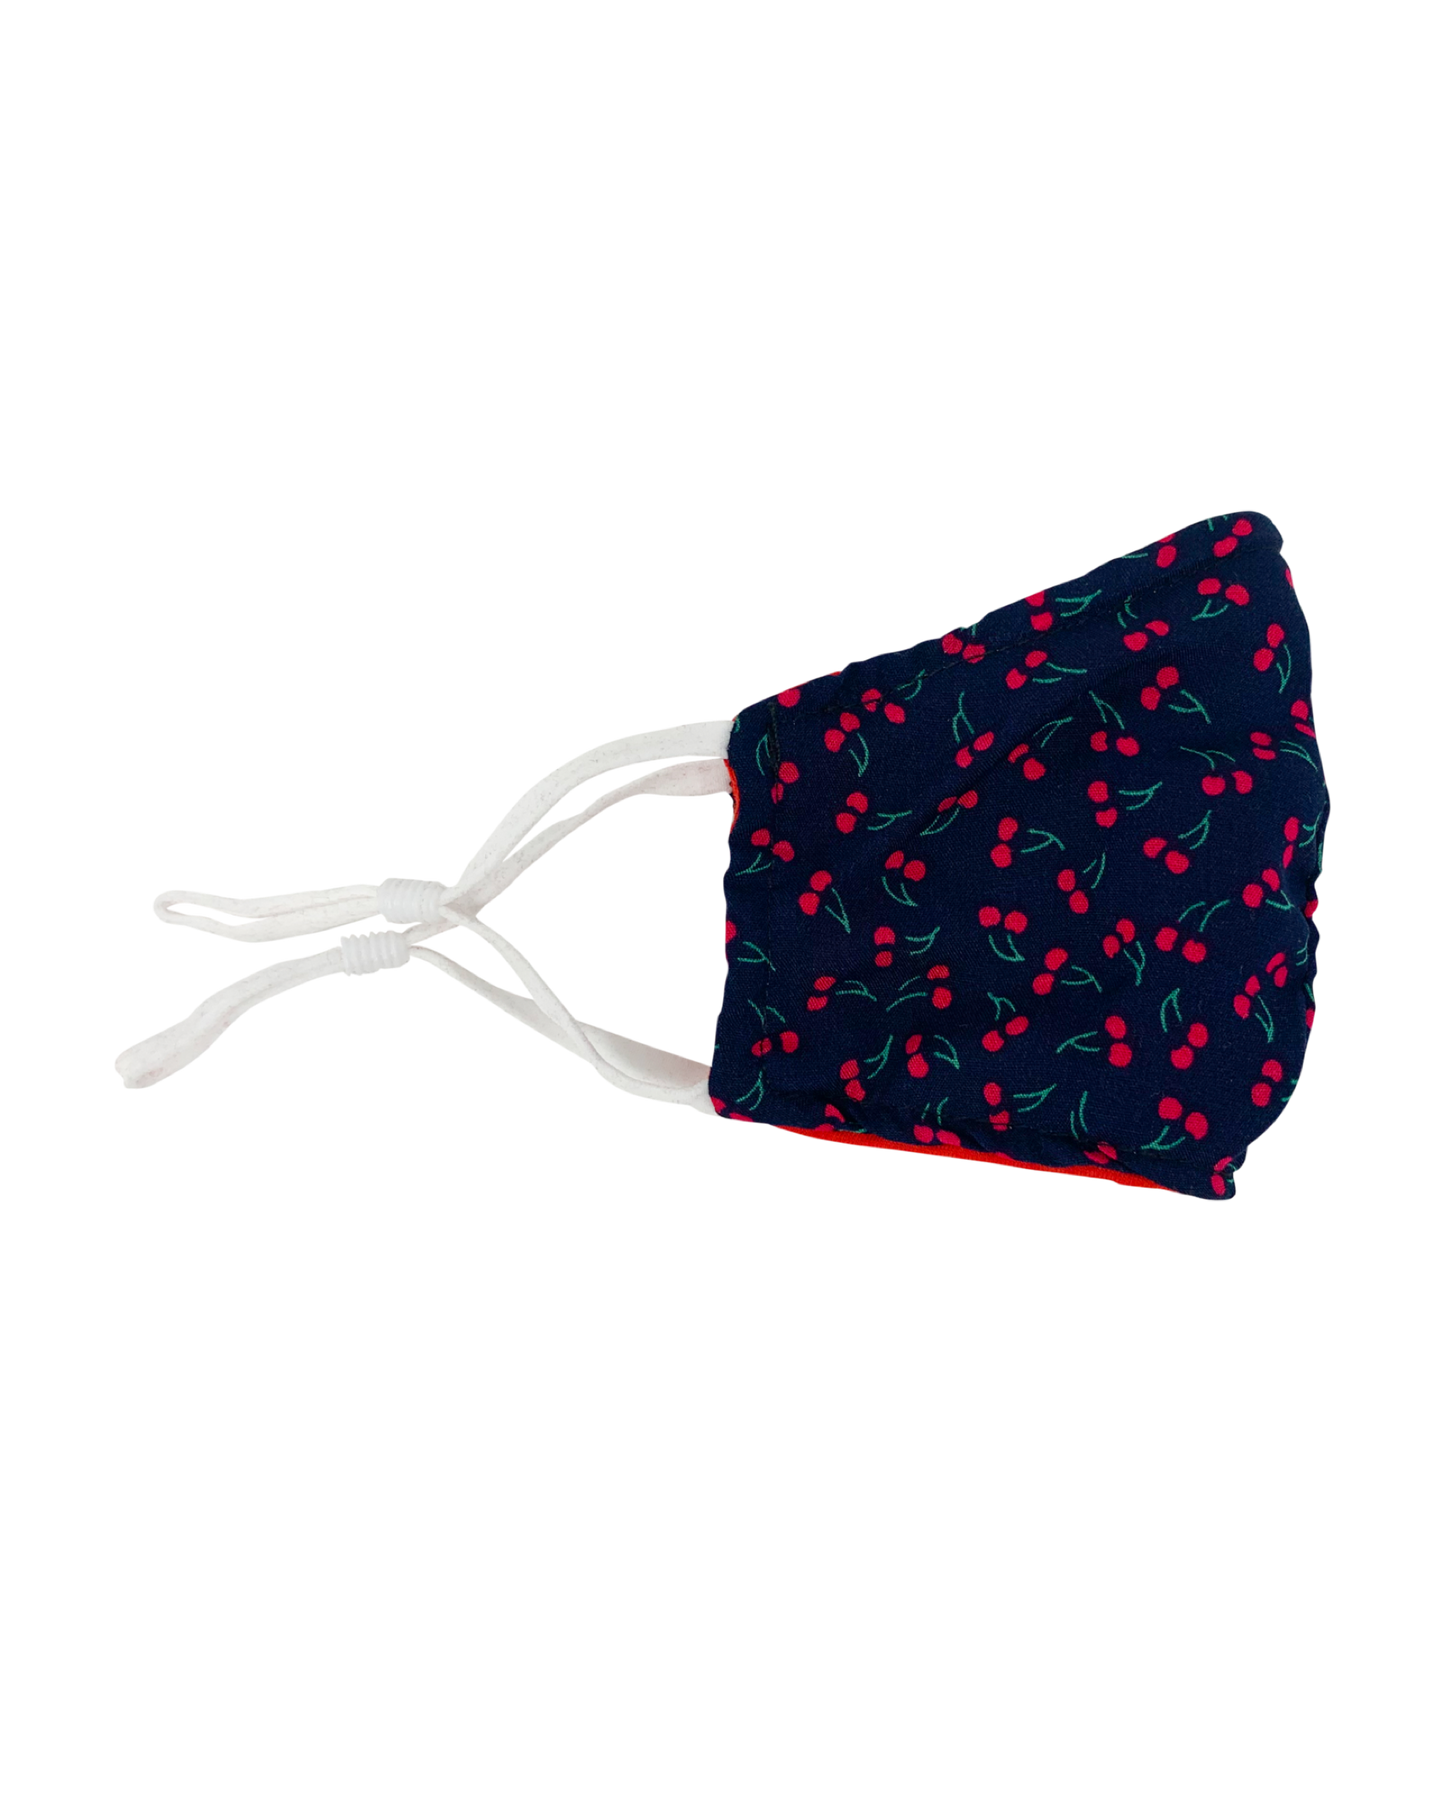 Washable Children's Fabric Face Mask [6-12] Cherries